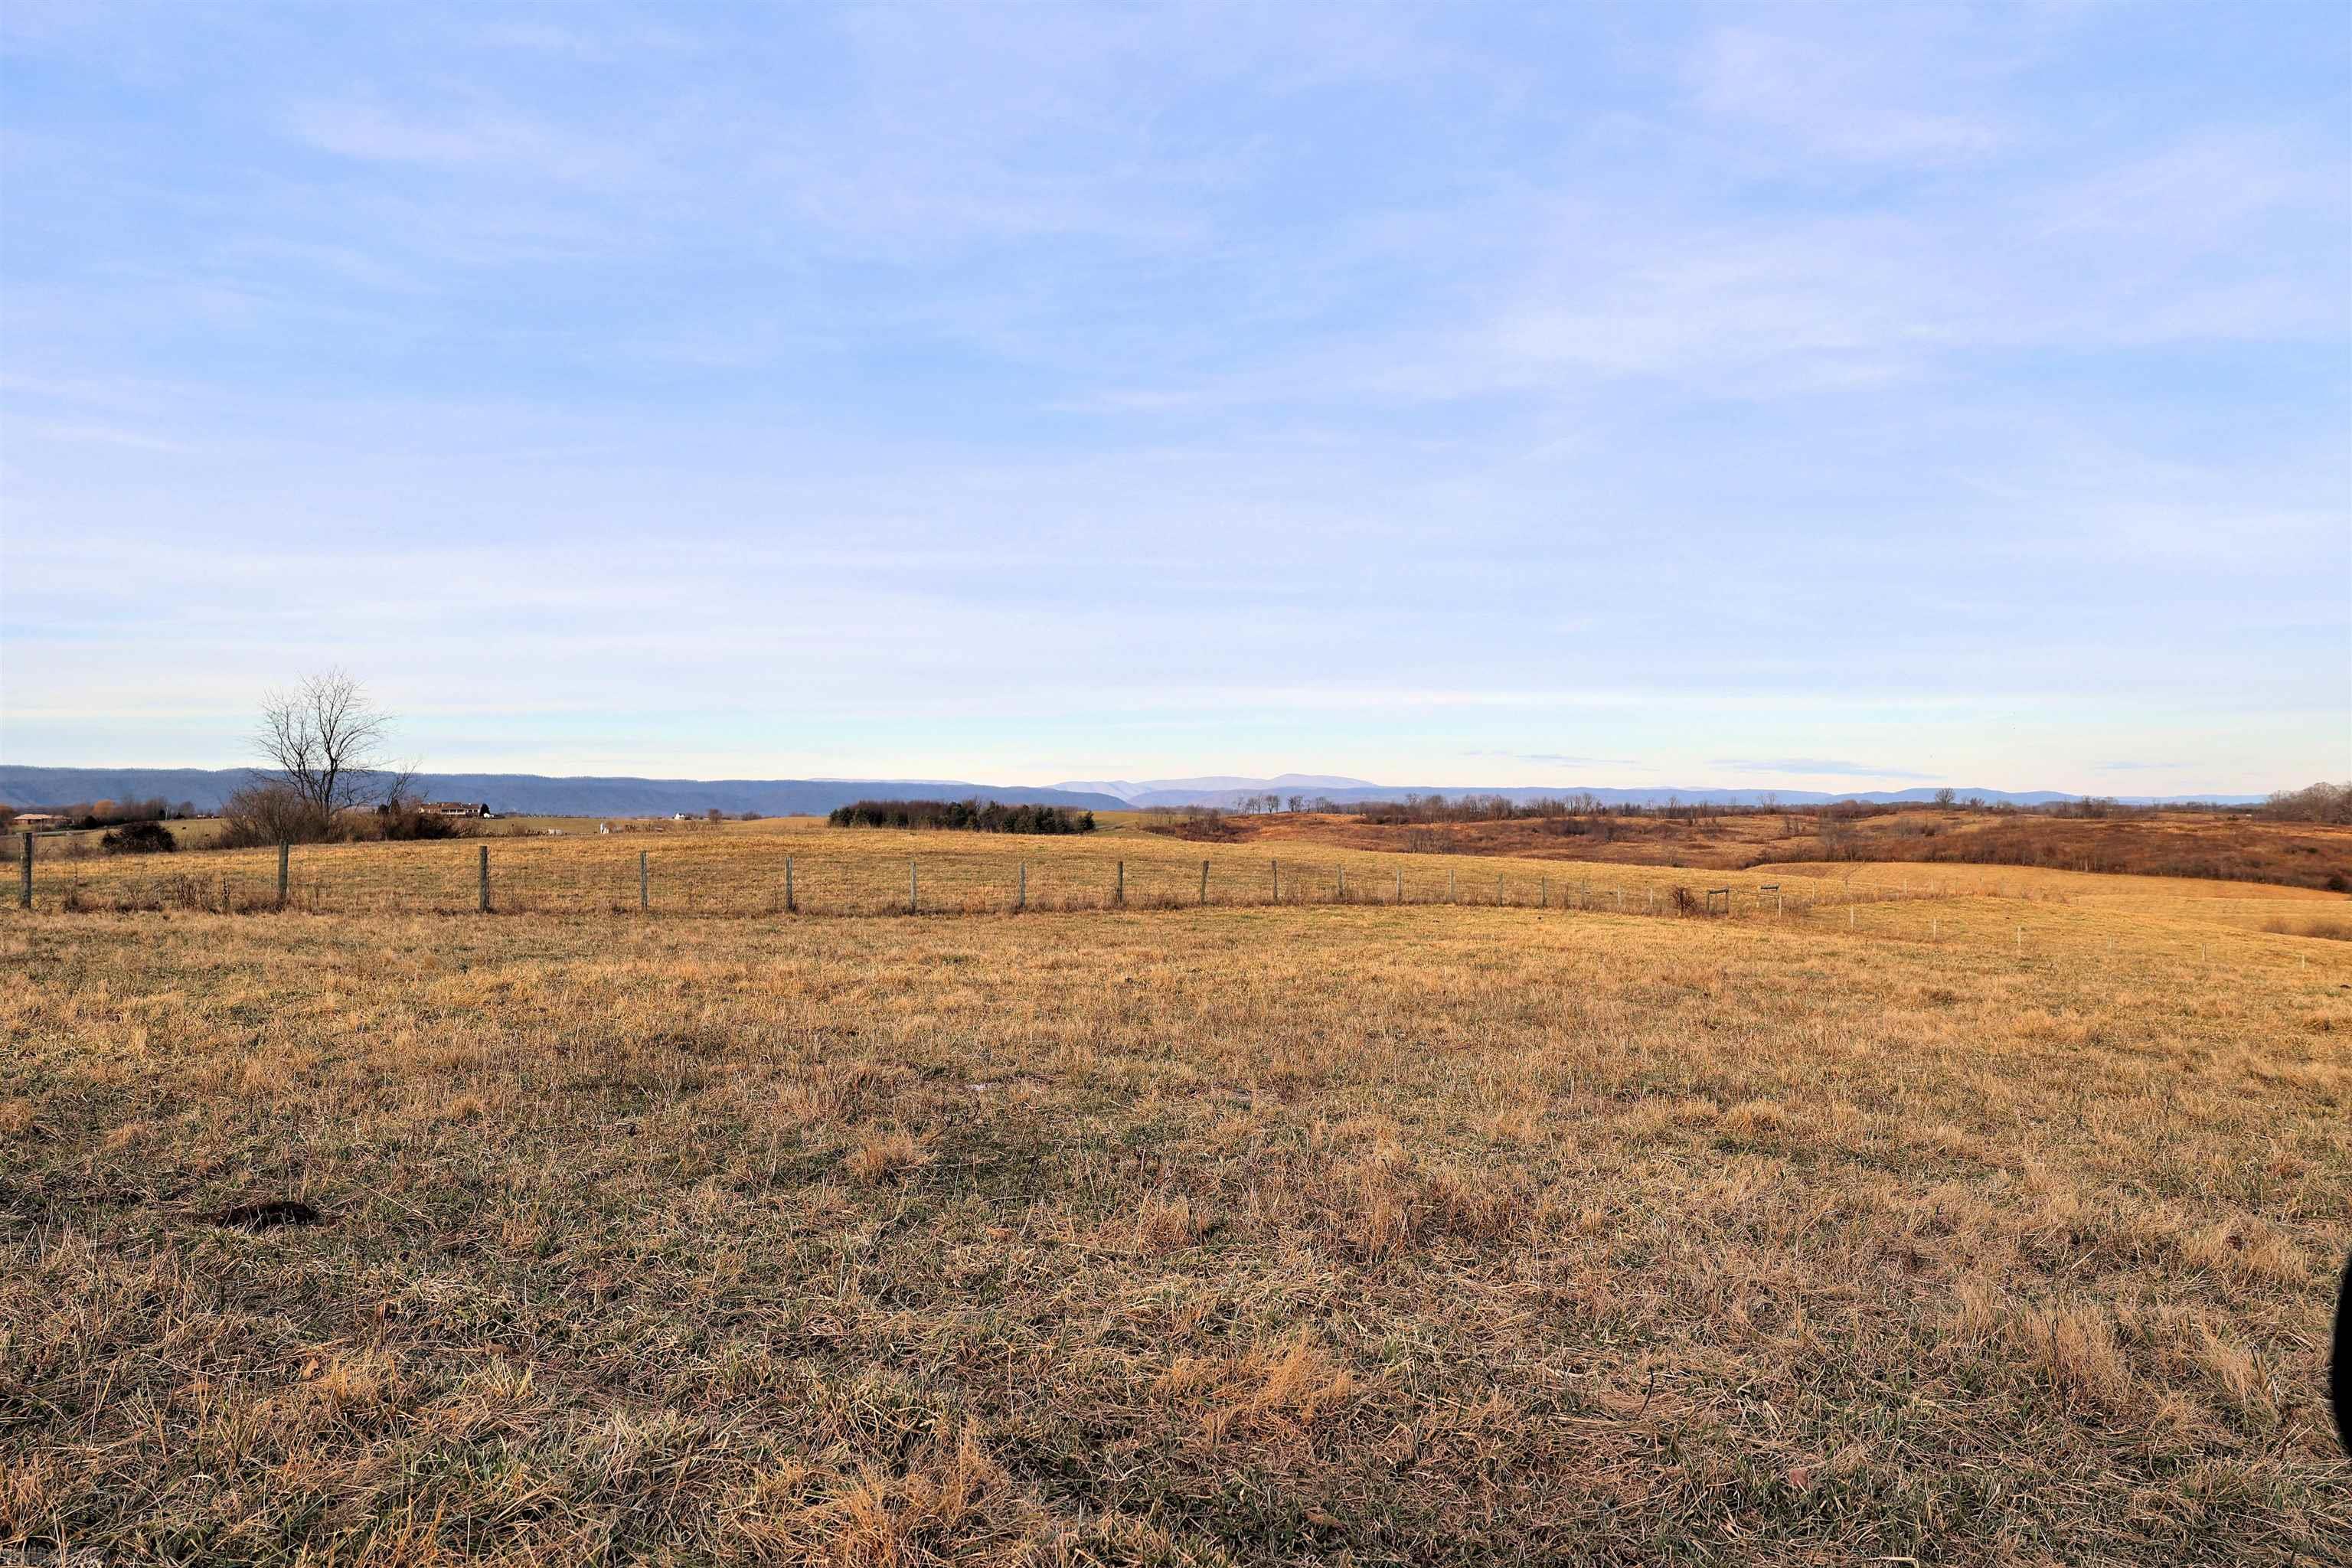 Great property with over 93+ acres of land with development potential with frontage on Lee Highway/Rt. 11.   Well laying open land is suitable for development or grazing for cattle/horses with fencing in place.  Call for your private showing today!